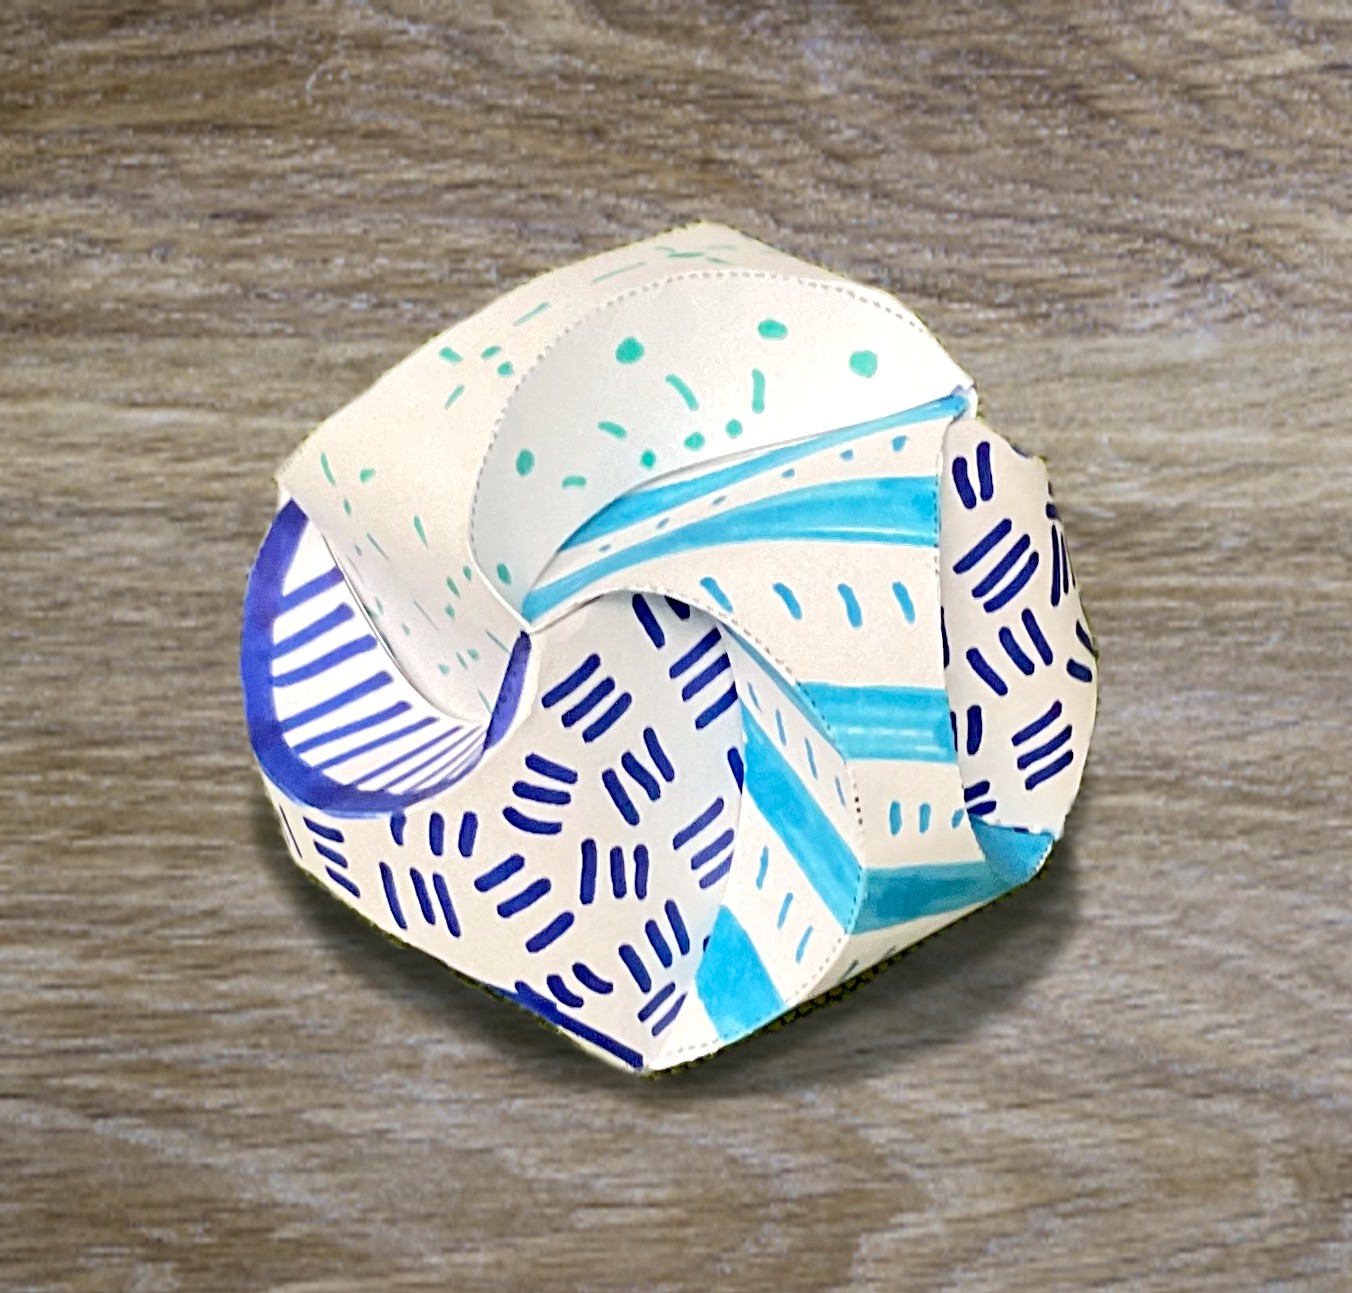 a colorful geometric paper orb with multiple sides that looks like it's swirling. Each face has a different pattern and color: purple hatch marks, green dots and lines, light blue stripes and lines